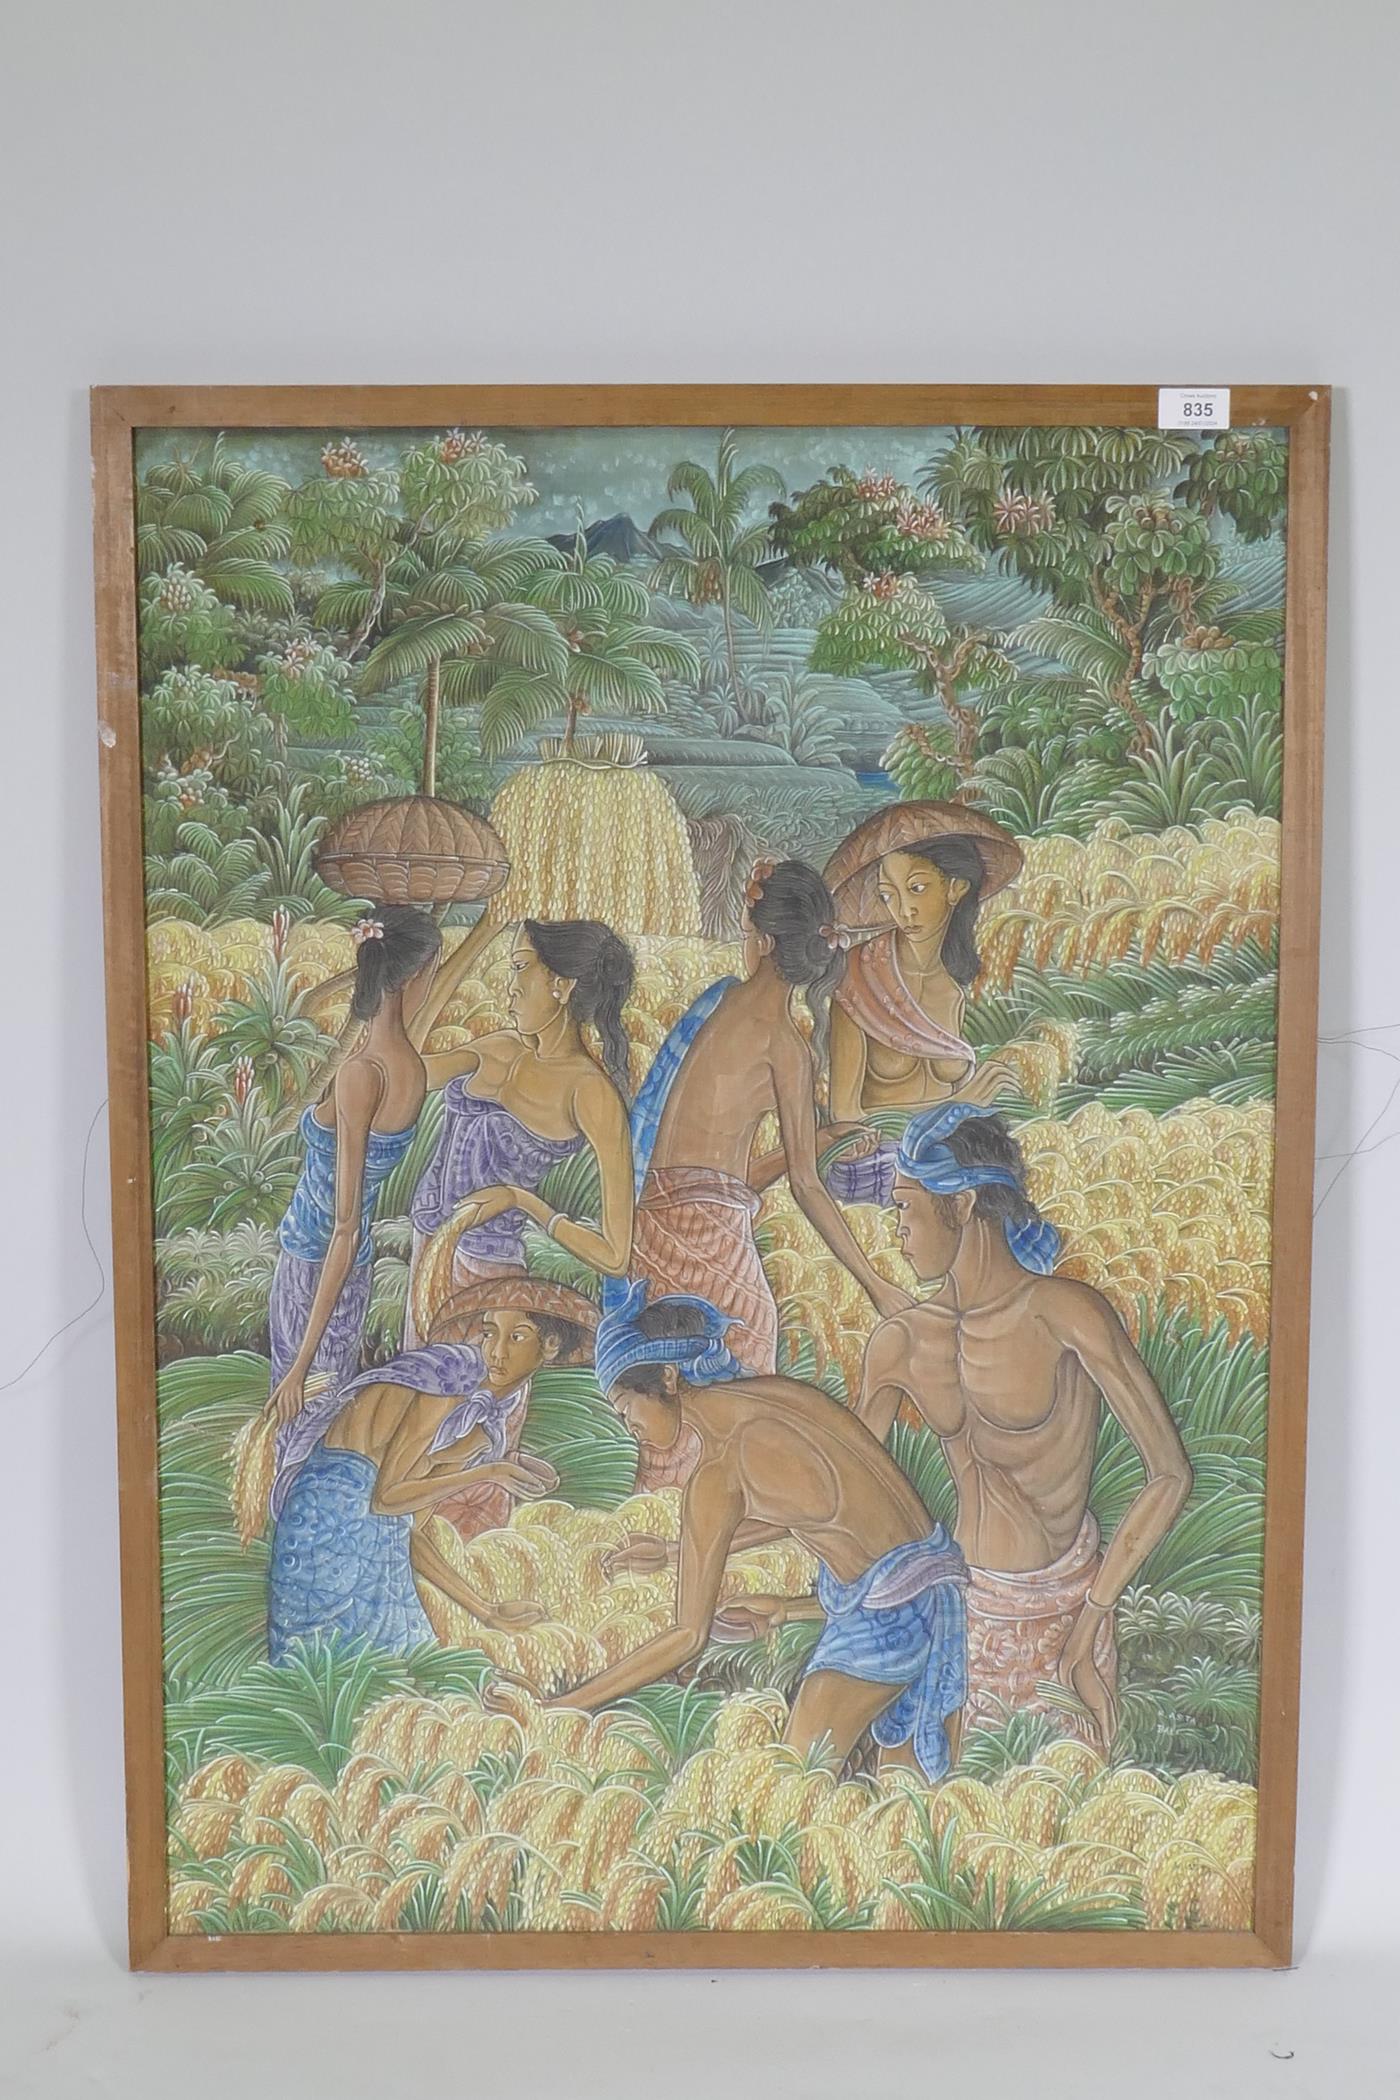 K. Asta, Balinese landscape with harvesters, signed K. Asta, Bali, oil/acrylic o n canvas, 63 x 86cm - Image 2 of 4